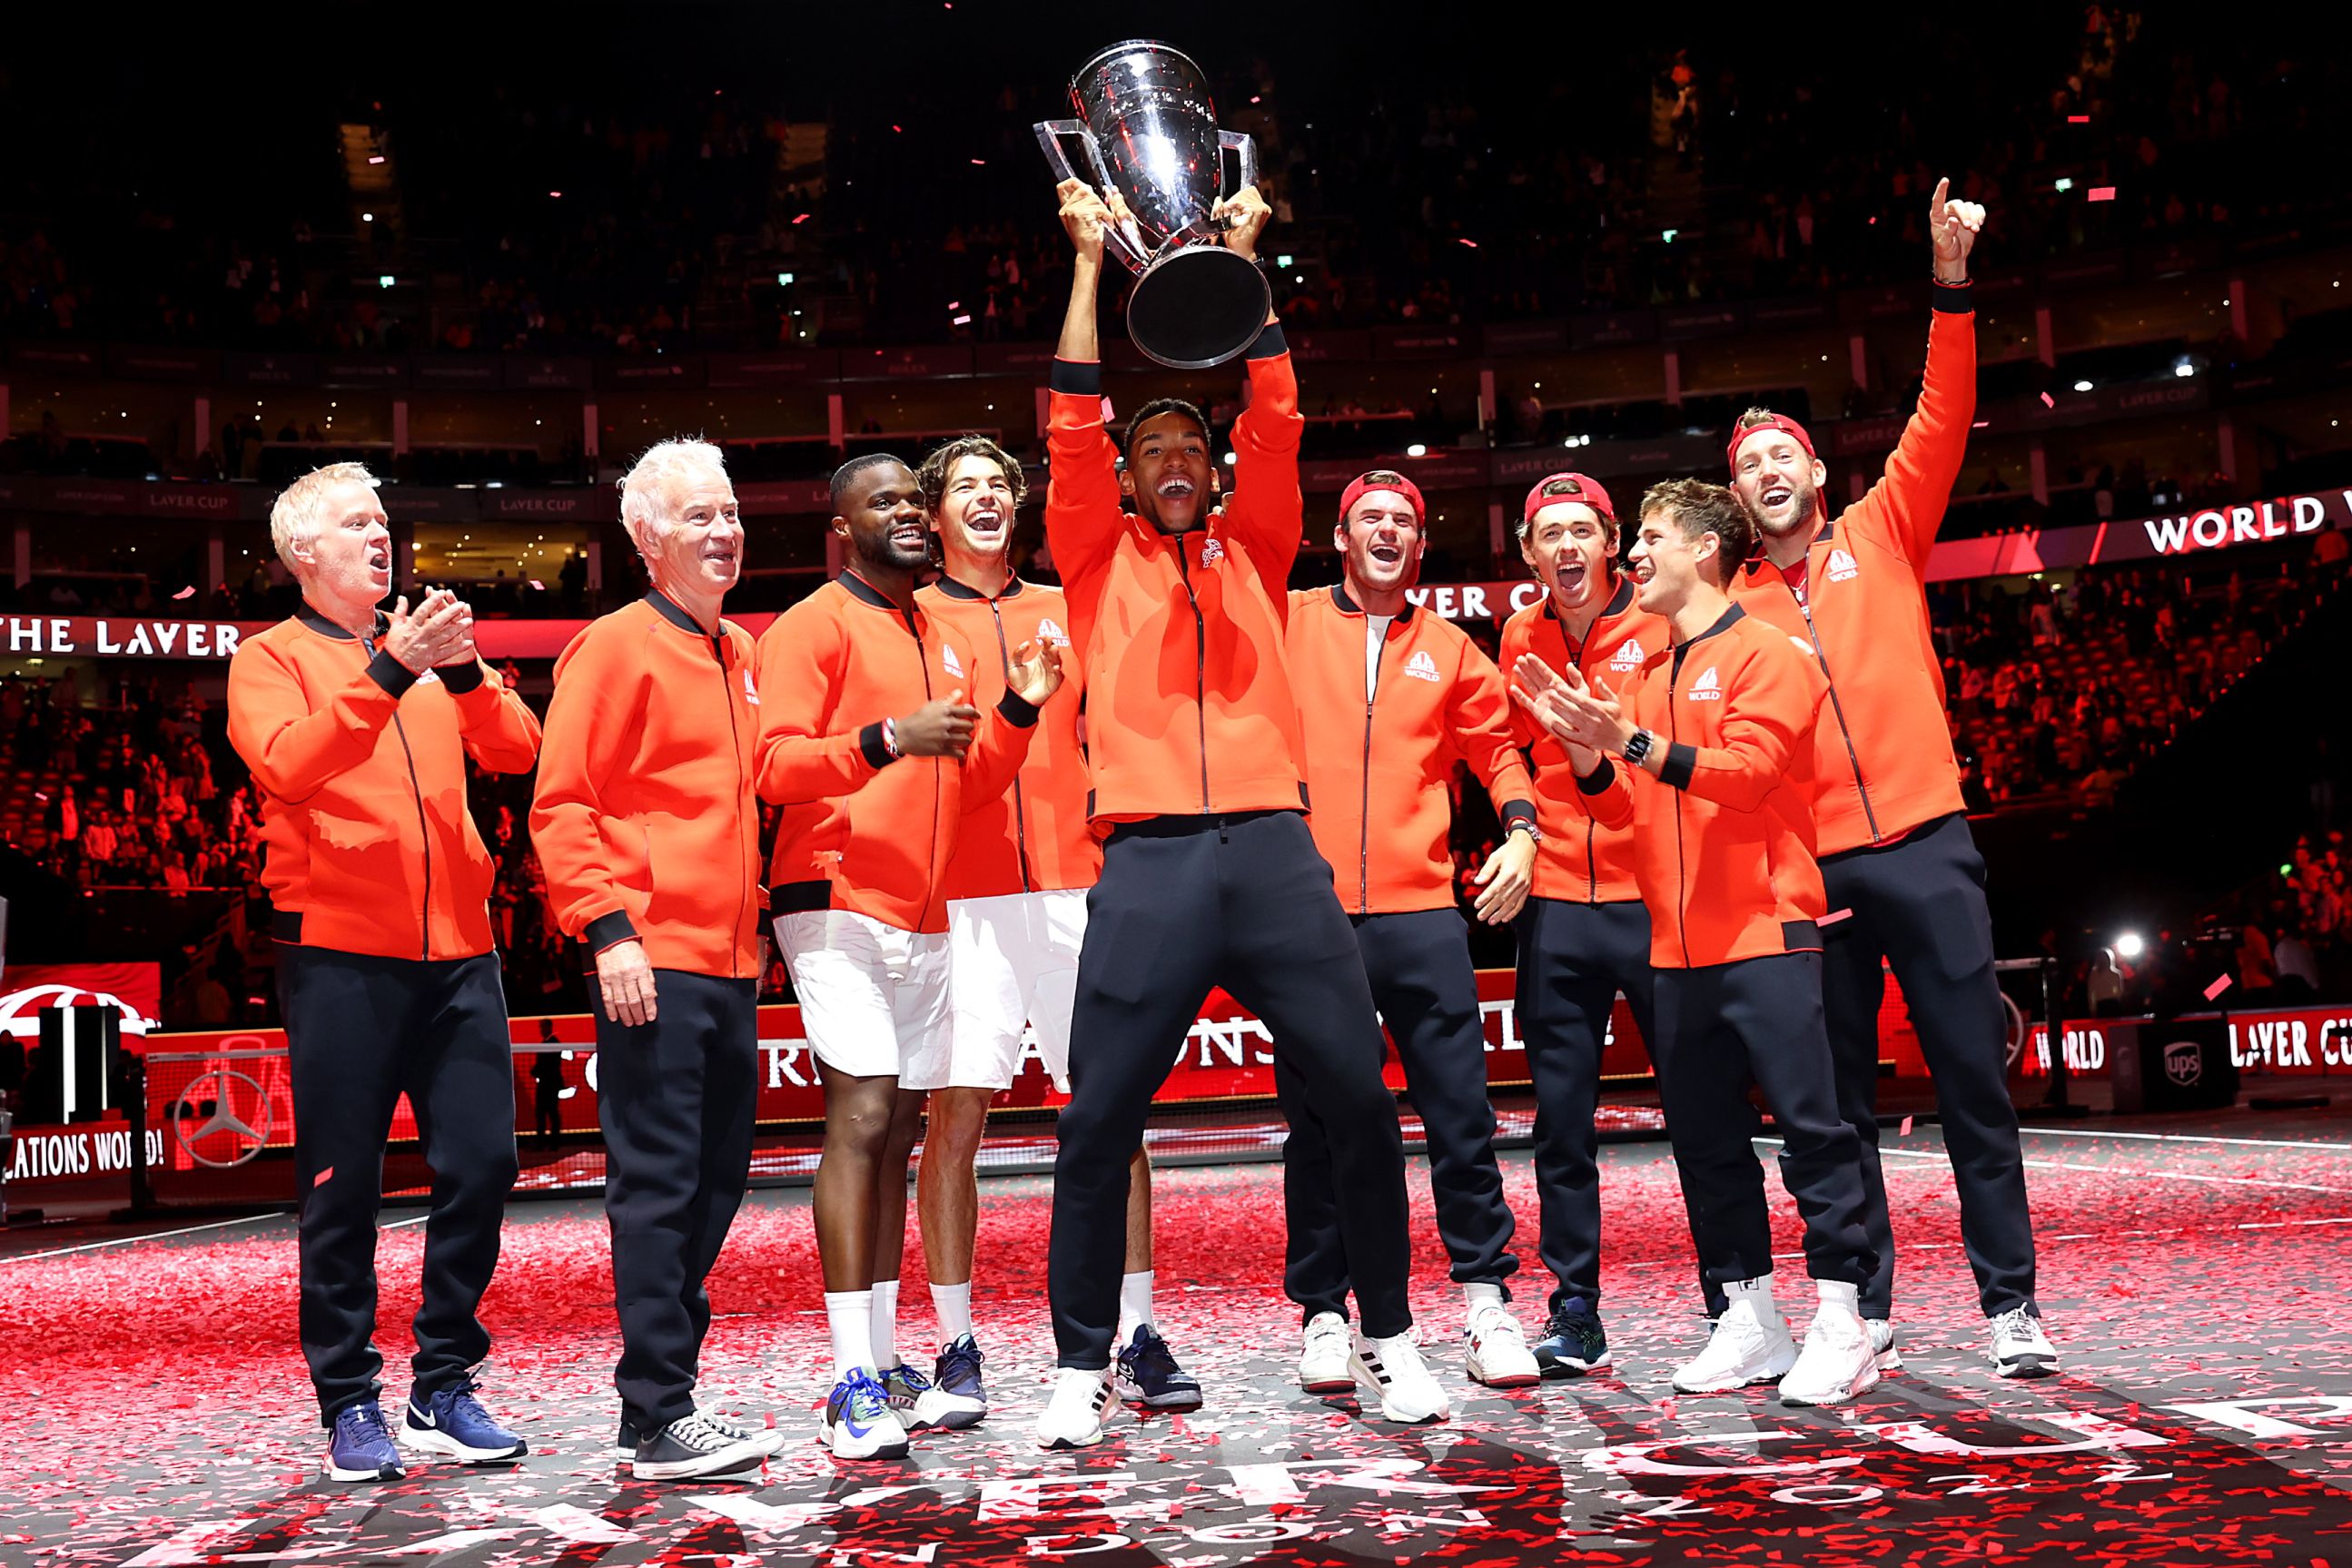 Laver Cup 2022 Daily updates and results